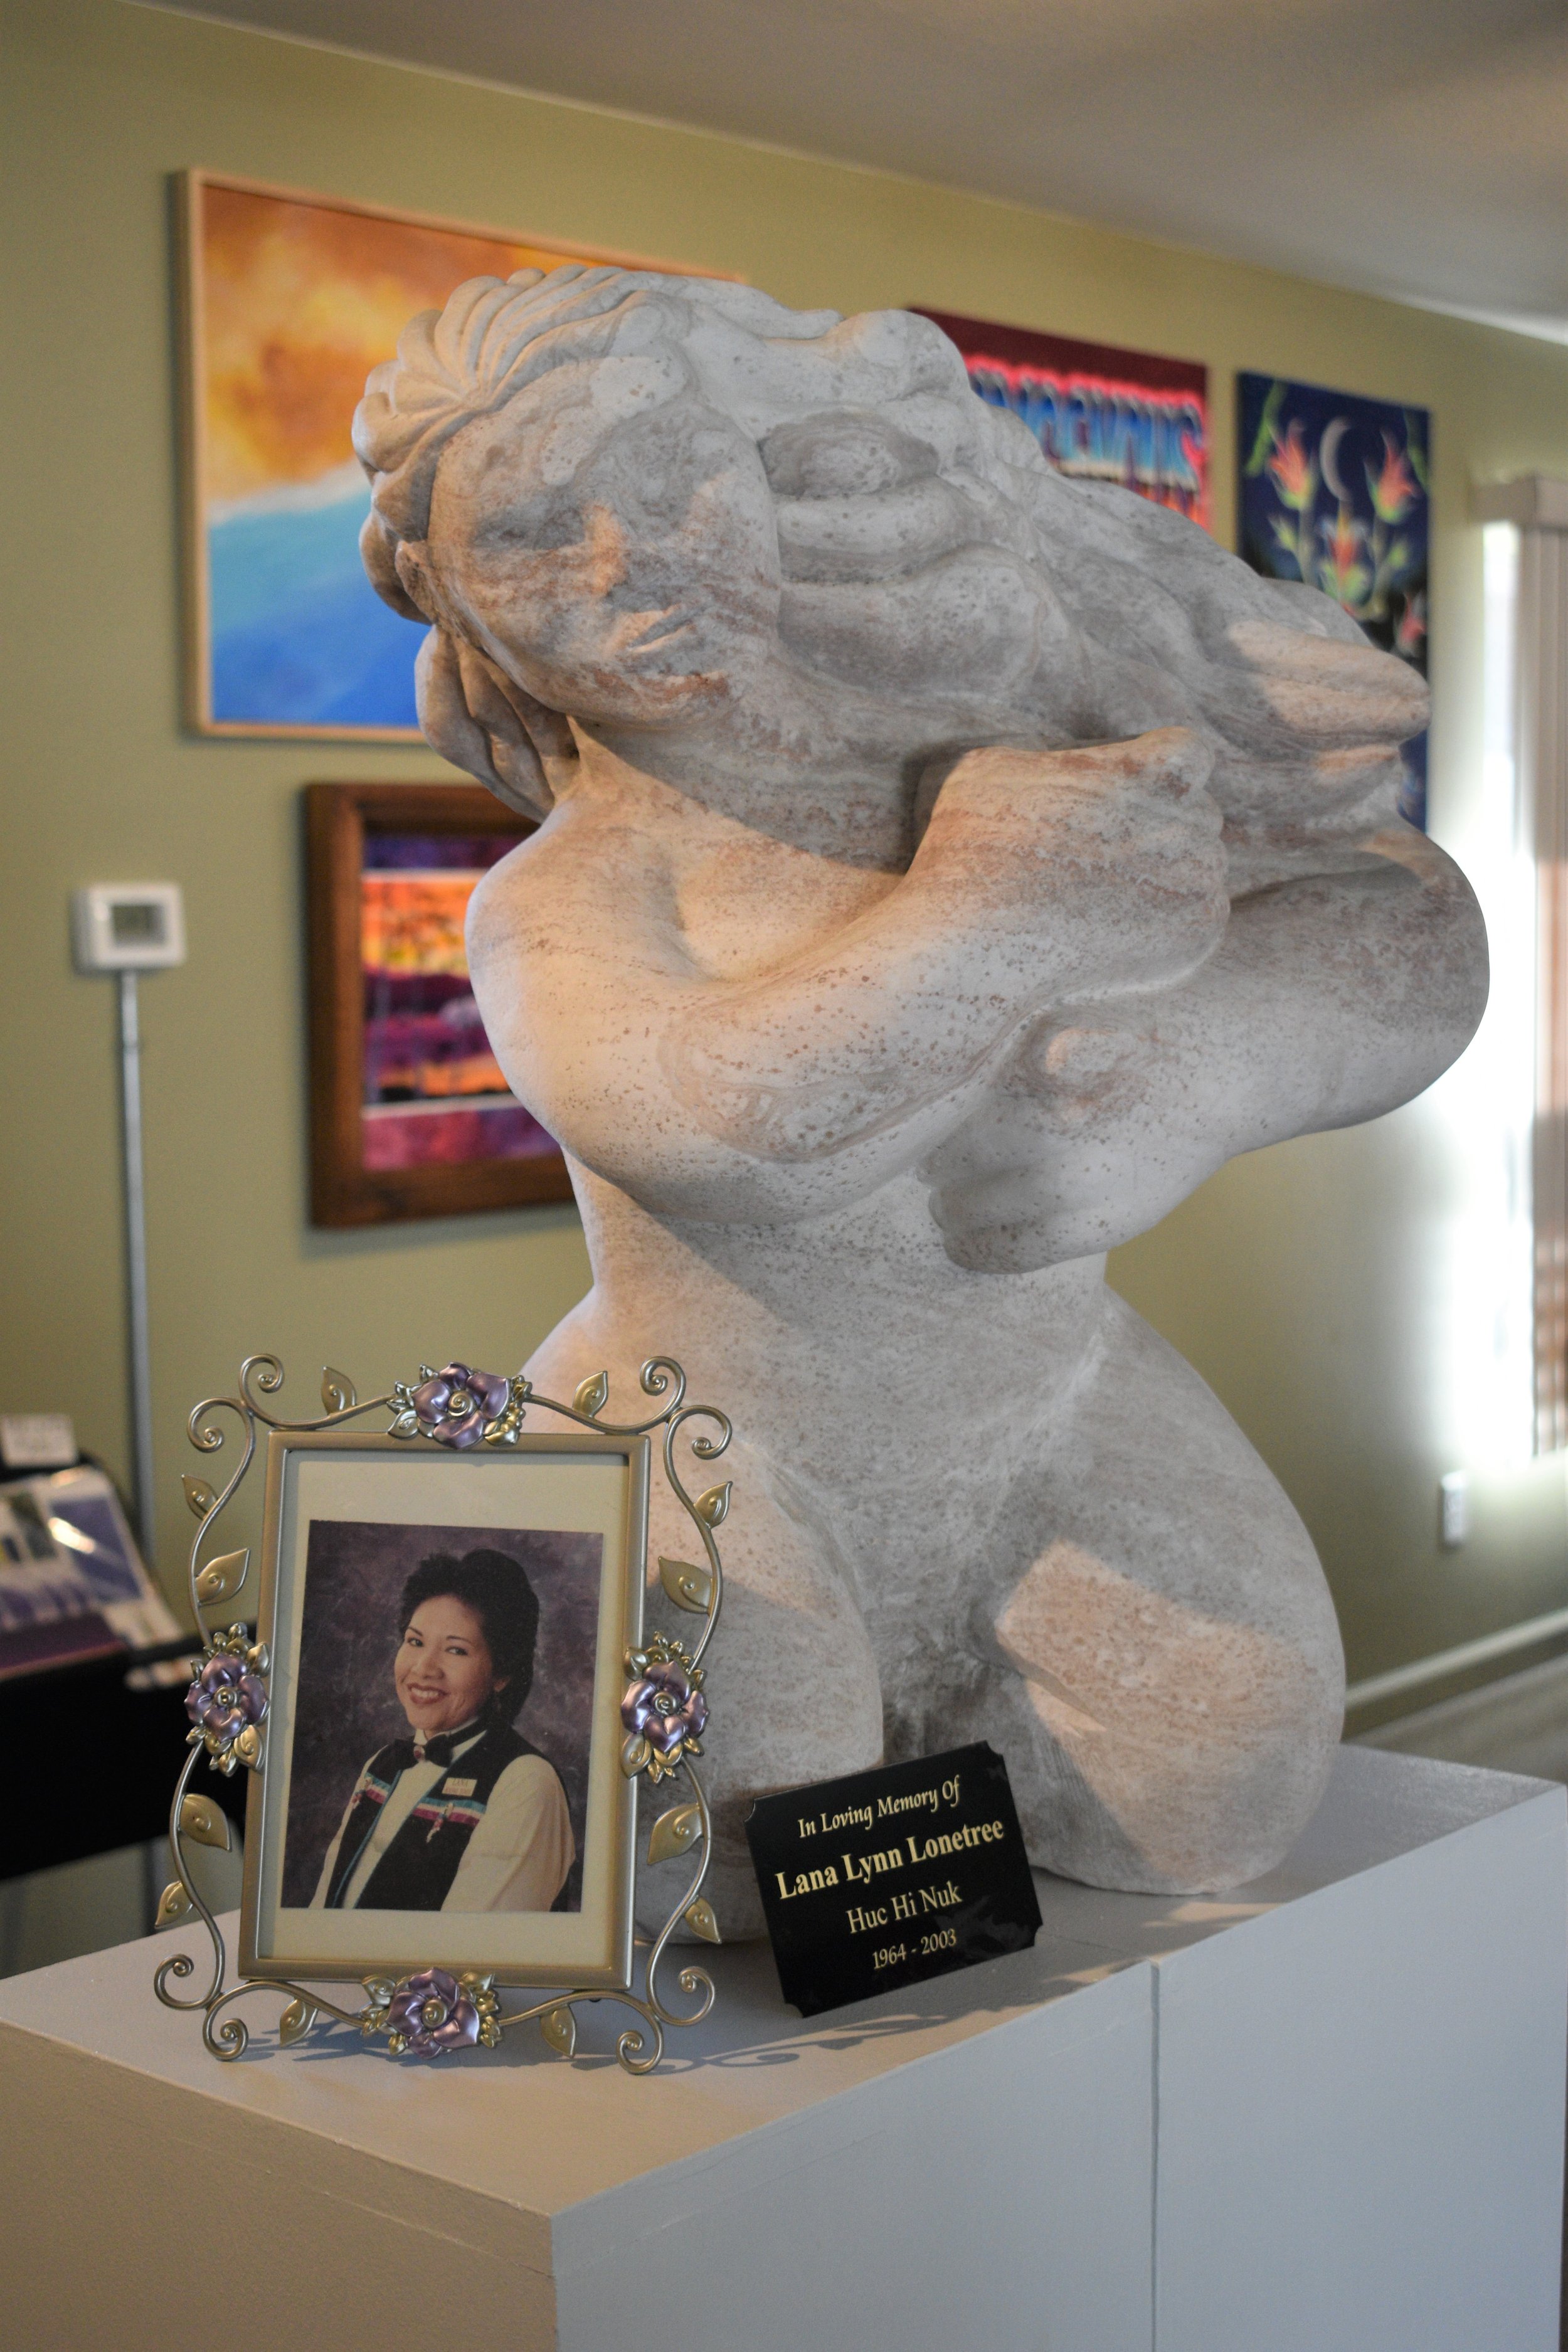  Sculpture by the late Lana Lonetree 